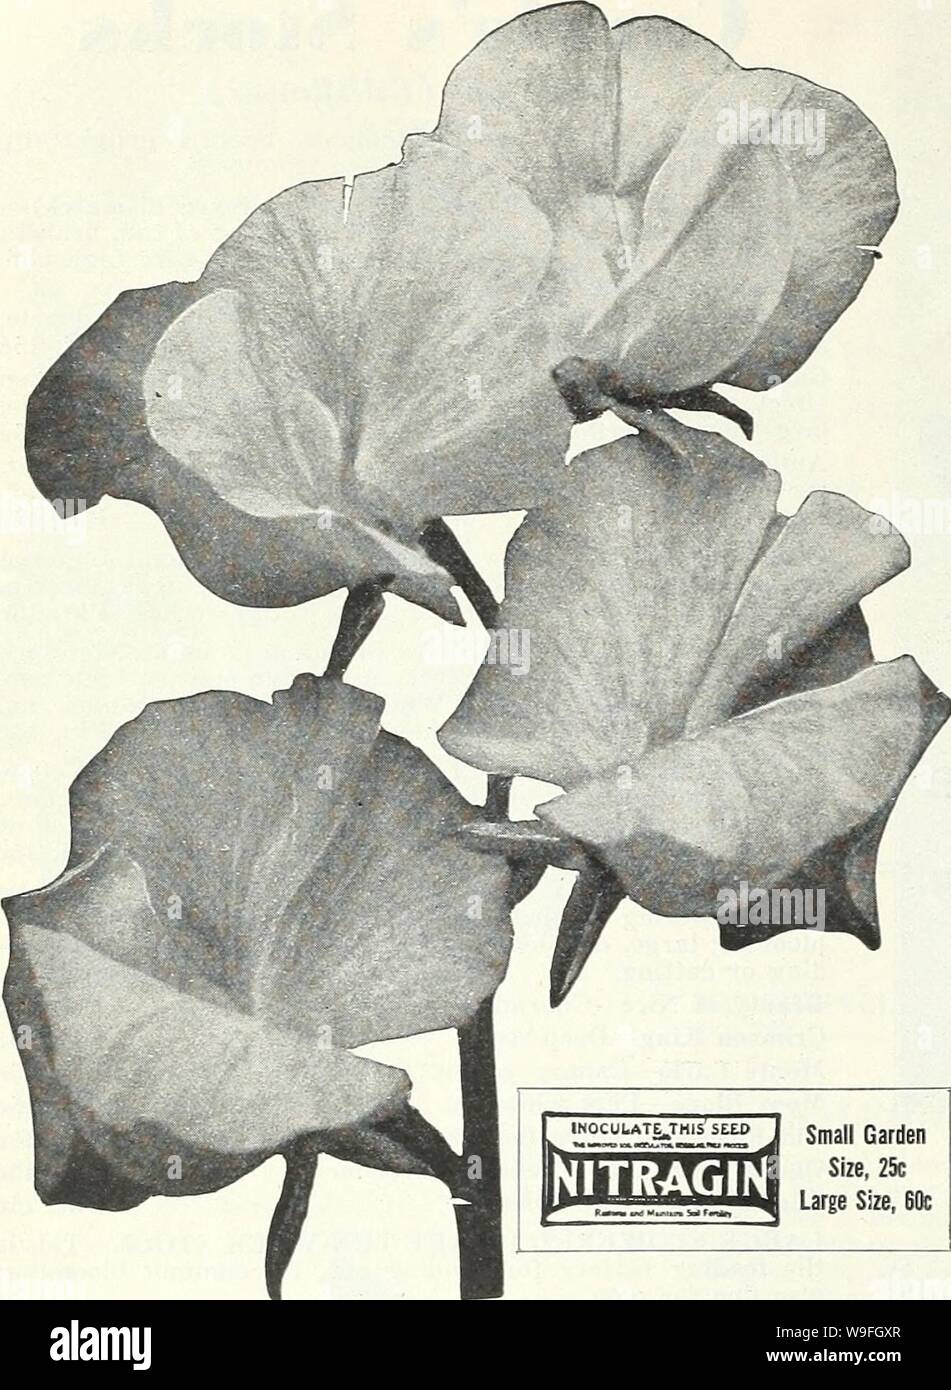 Archive image from page 41 of Currie's garden annual  spring. Currie's garden annual : spring 1934 59th year  curriesgardenann19curr 0 Year: 1934 ( CURRIE BROTHERS CO.. MILWAUKEE, WIS    NITRAGIN' Small Garden Size, 25c Large Size, 60c Sweet Peas Beautiful, Fragrant, Fashionable HOW TO GROW THEM—Sweet Peas should be planted as early in spring as the ground can be worked. Rich loam with an abundance of well rotted manure is an ideal soil. A trench about 6 inches deep should be made, sowing the seed thinly in the bottom, and cover with an inch of soil, pressing it down firmly. Gradually fill in Stock Photo